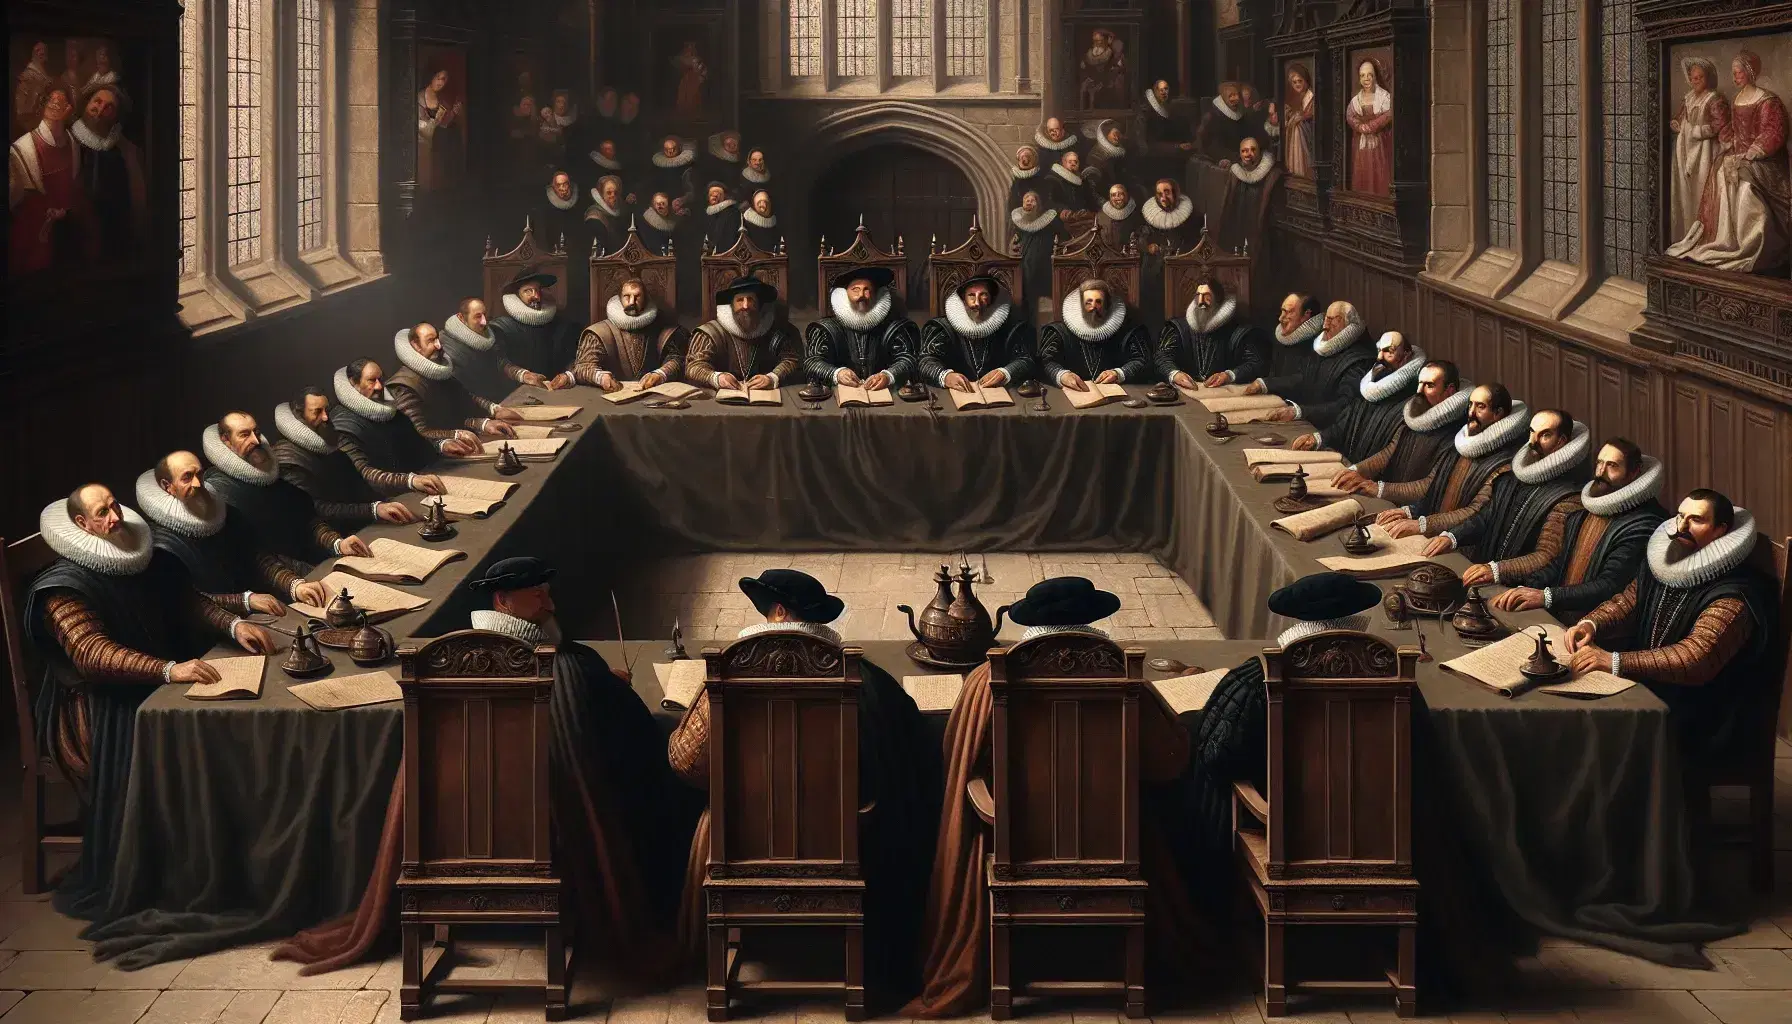 16th-century grand hall scene with men in period attire engaged in a serious discussion around a long wooden table adorned with quills, parchments, and goblets.